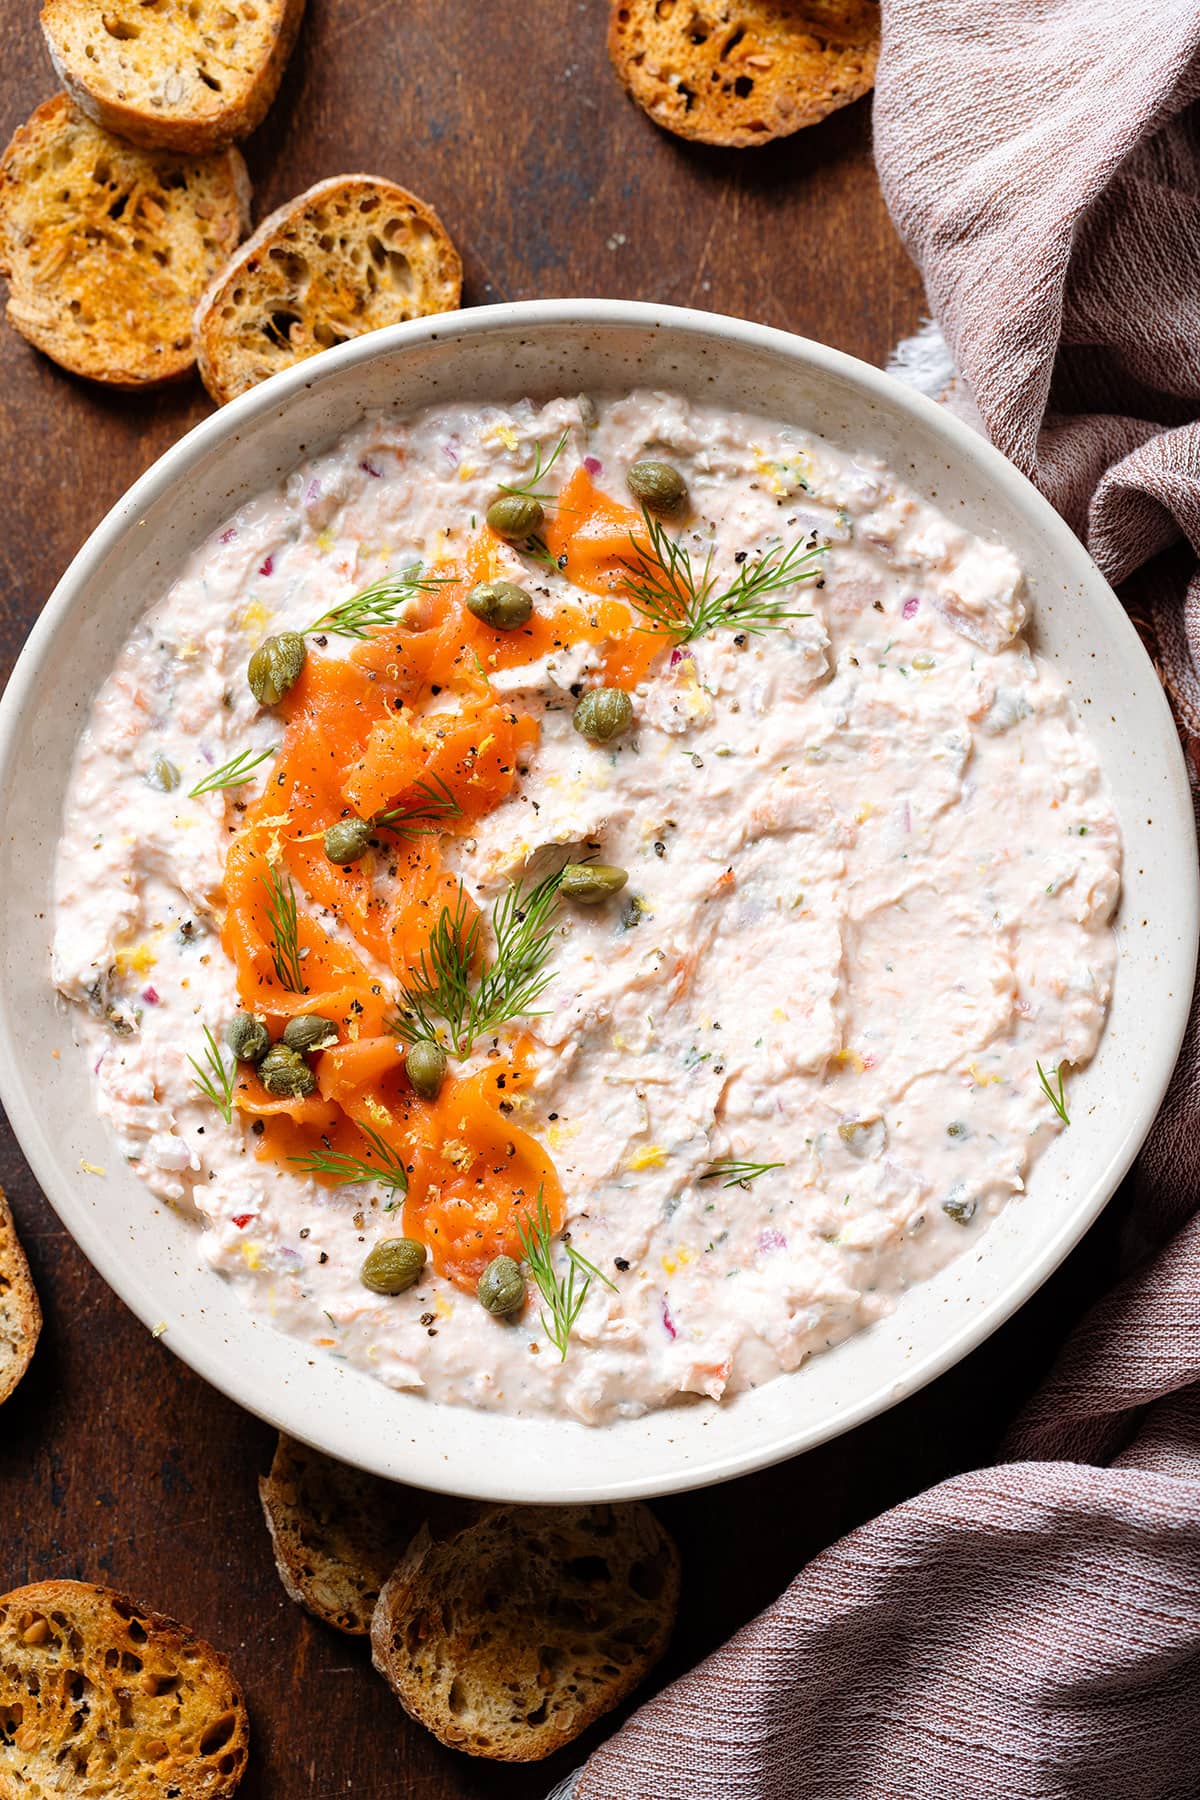 Smoked salmon dip garnished with more smoked salmon, capers, and fresh dill in a white bowl.